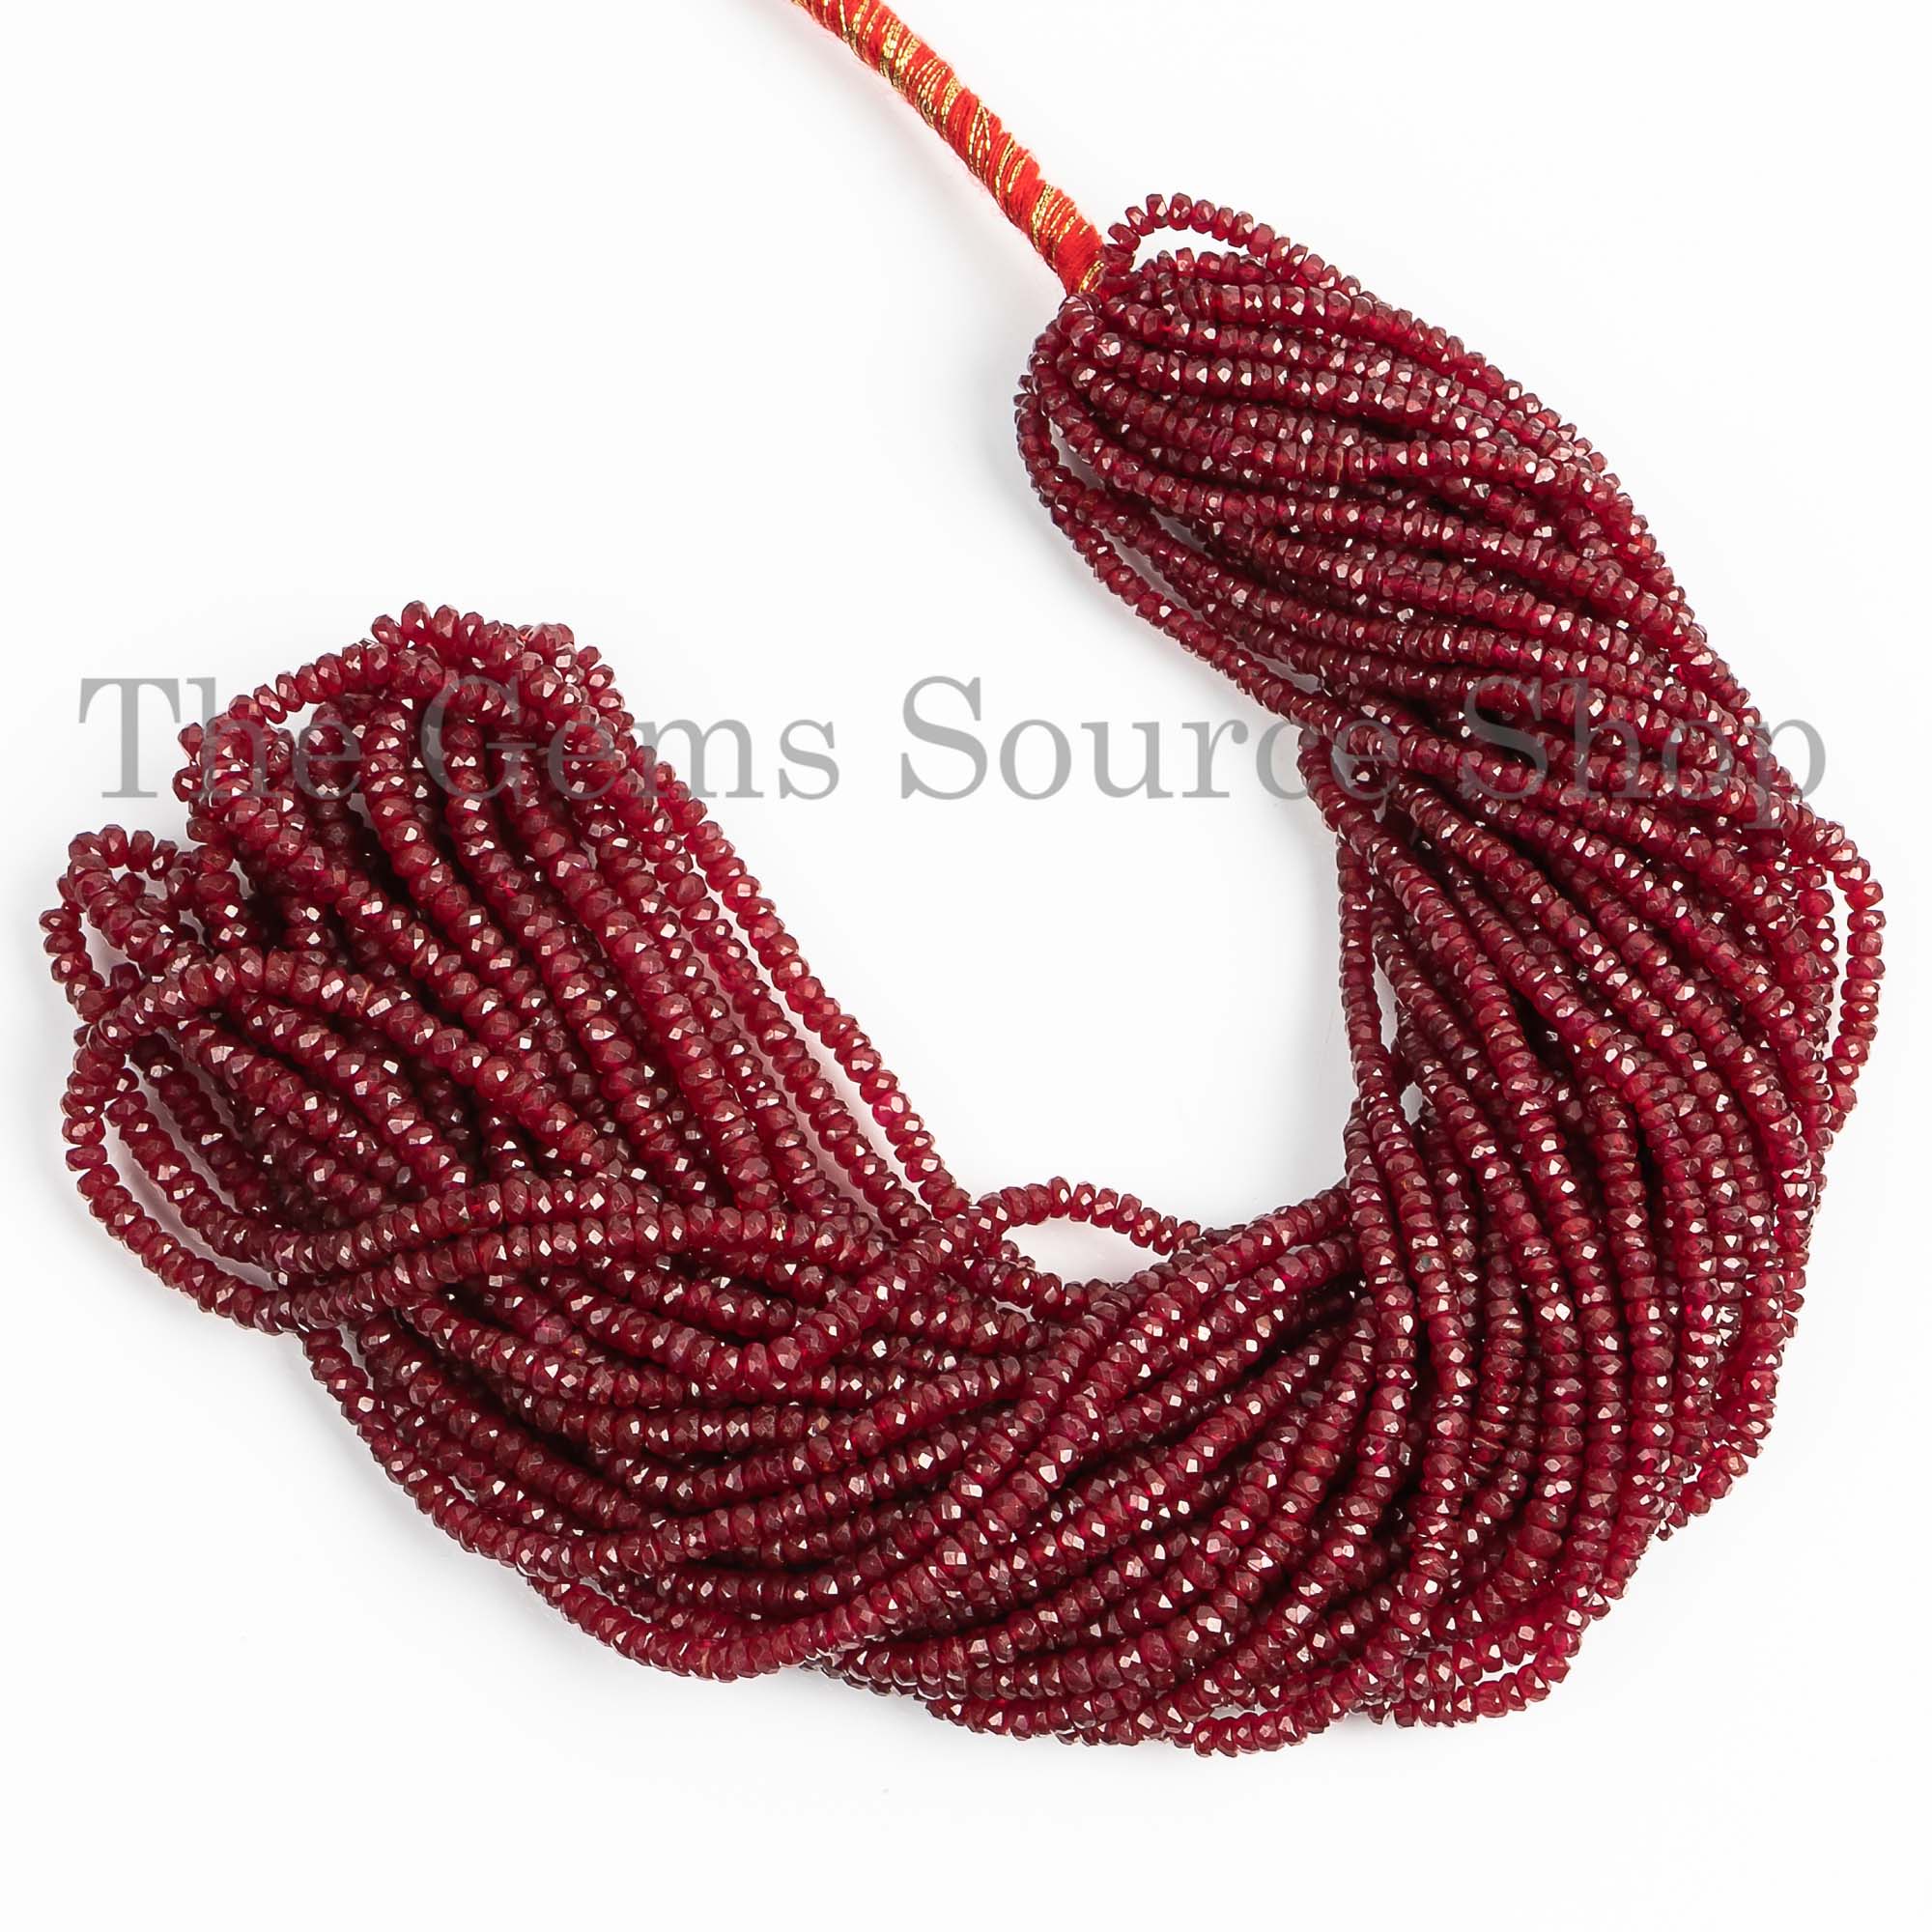 2.5-3mm Natural Ruby Faceted Beads, Ruby Rondelle Shape Beads, Ruby Briolette Beads, Ruby Beads, Jewelry Making Beads